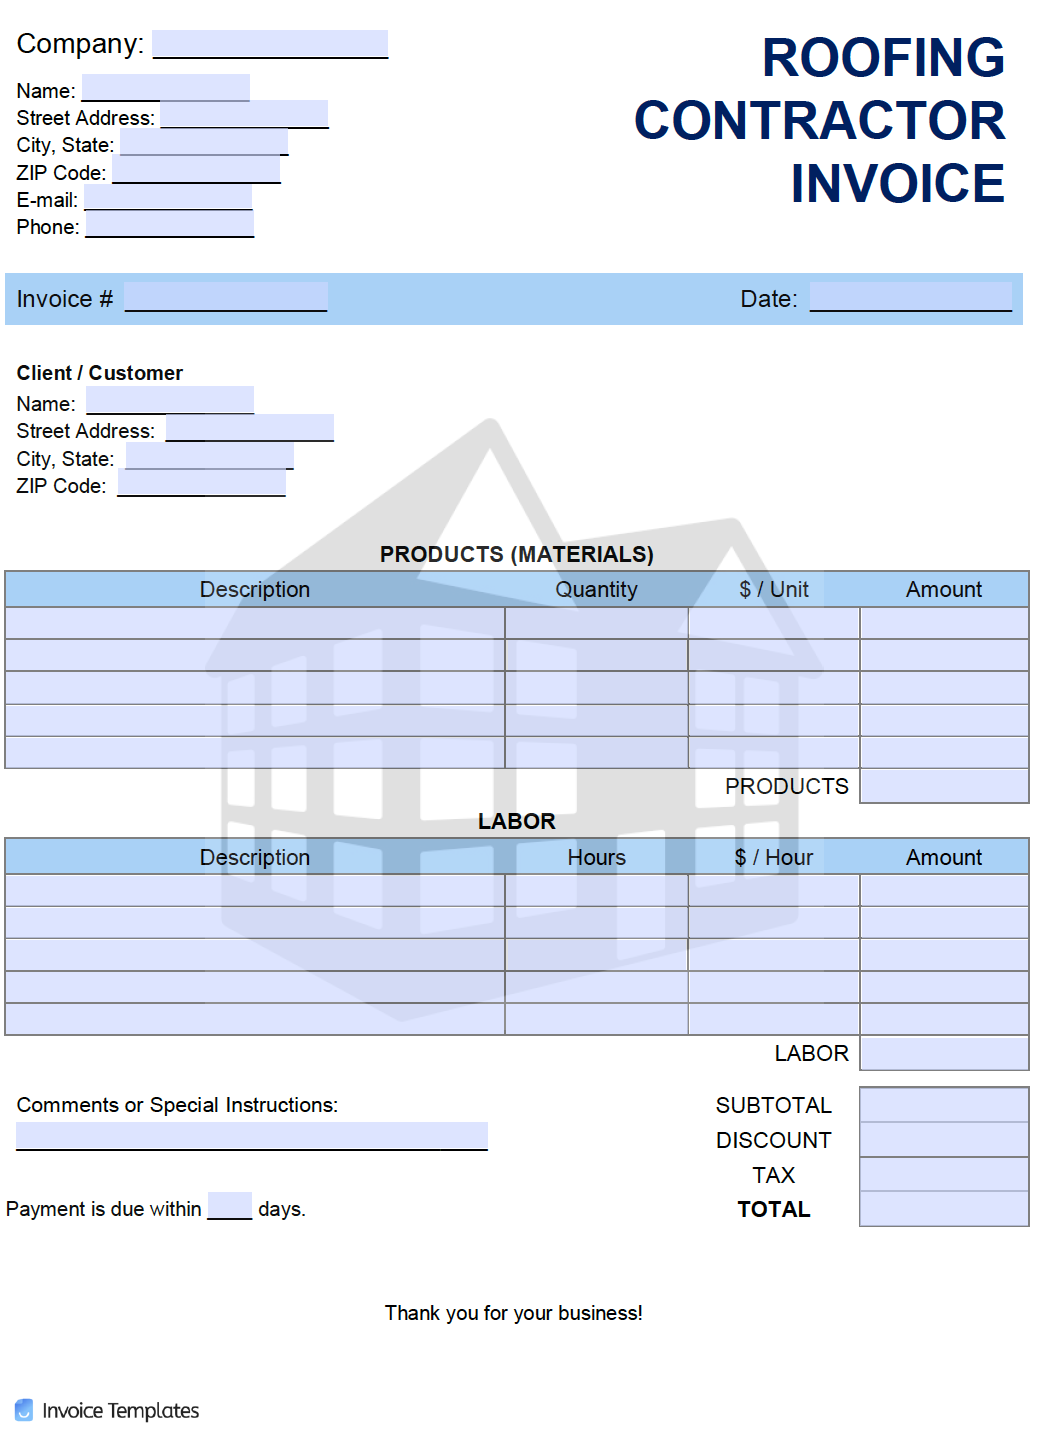 Free Roofing Contractor Invoice Template  PDF  WORD  EXCEL Regarding Free Roofing Invoice Template